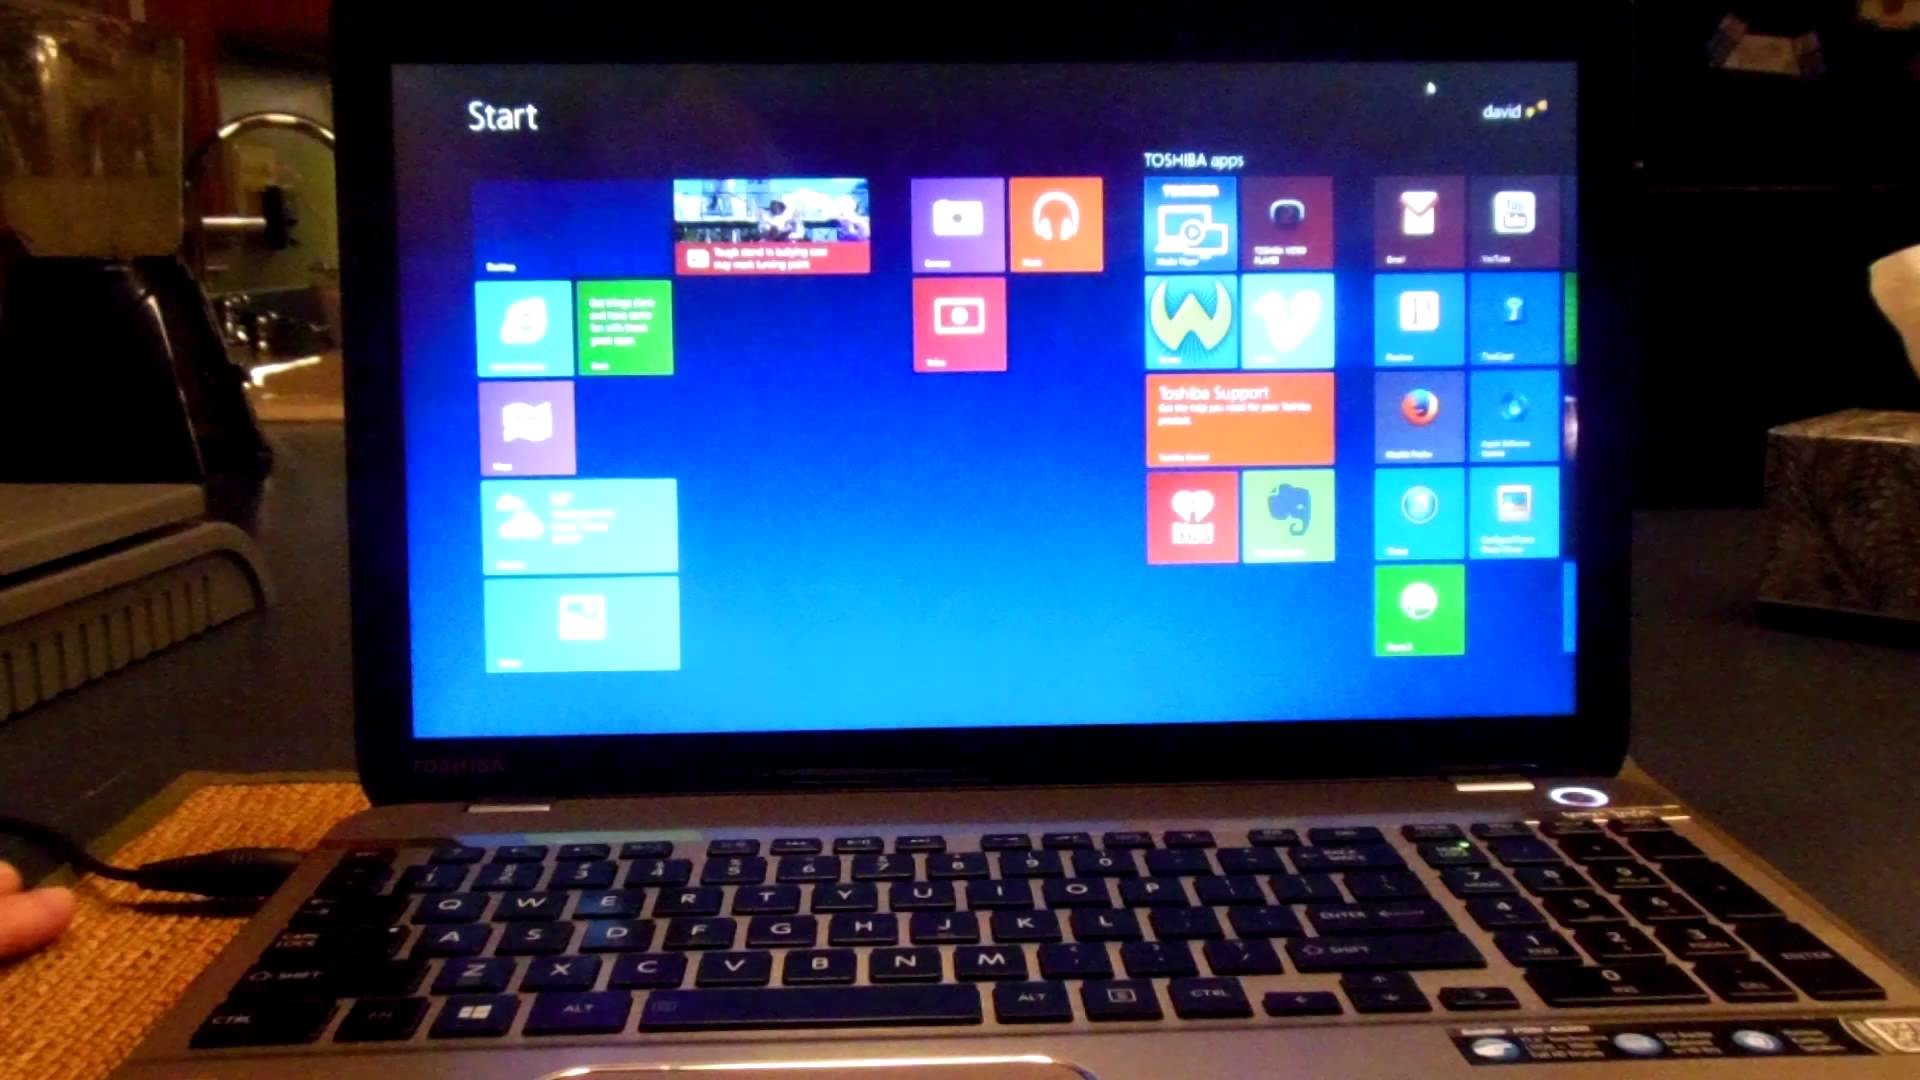 1920x1080 Windows 8.1 Update Breaks Touchscreen on Toshiba P55t; Reverts Login from  Local to Windows Live - YouTube